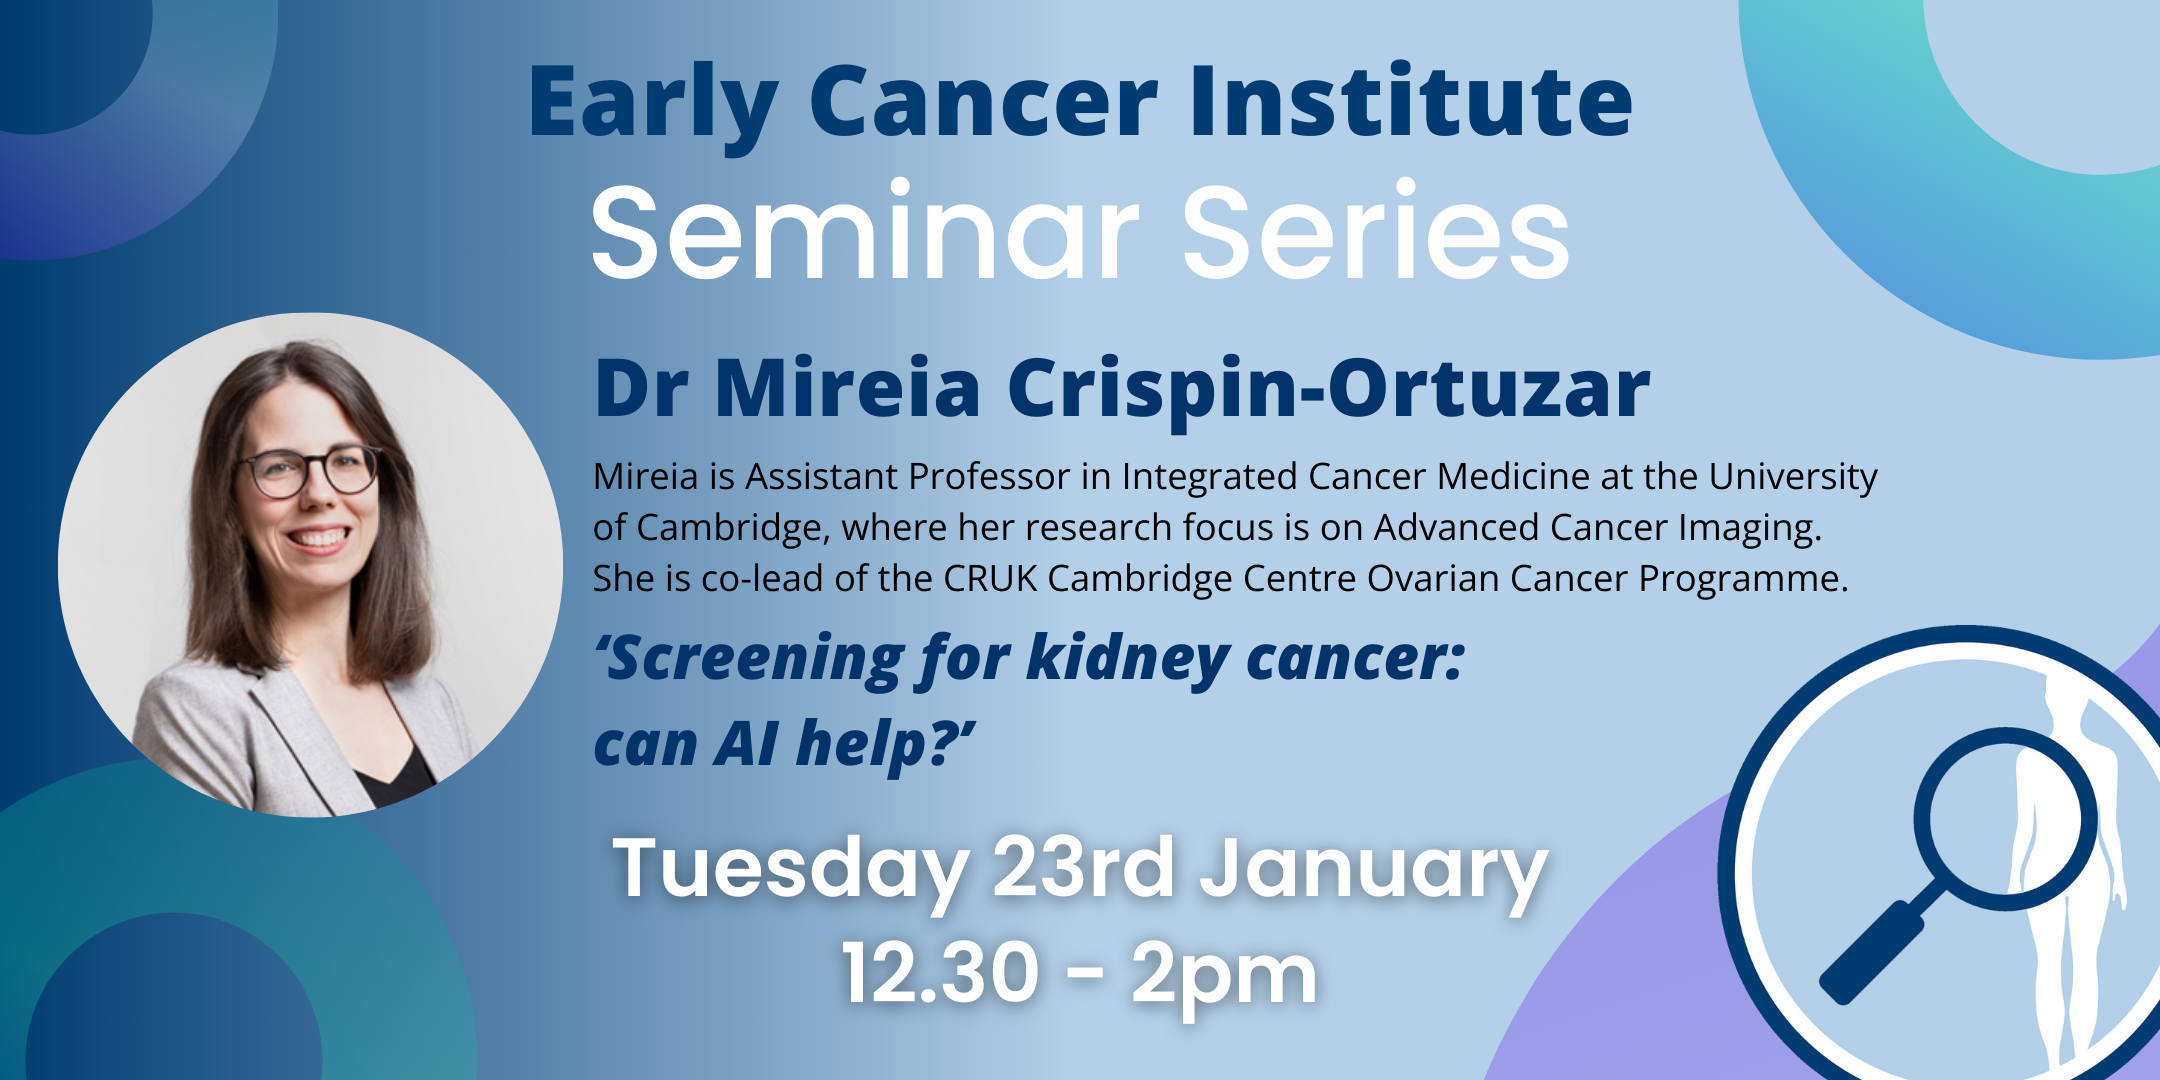 Early Cancer Institute Seminar: Dr Mireia Crispin